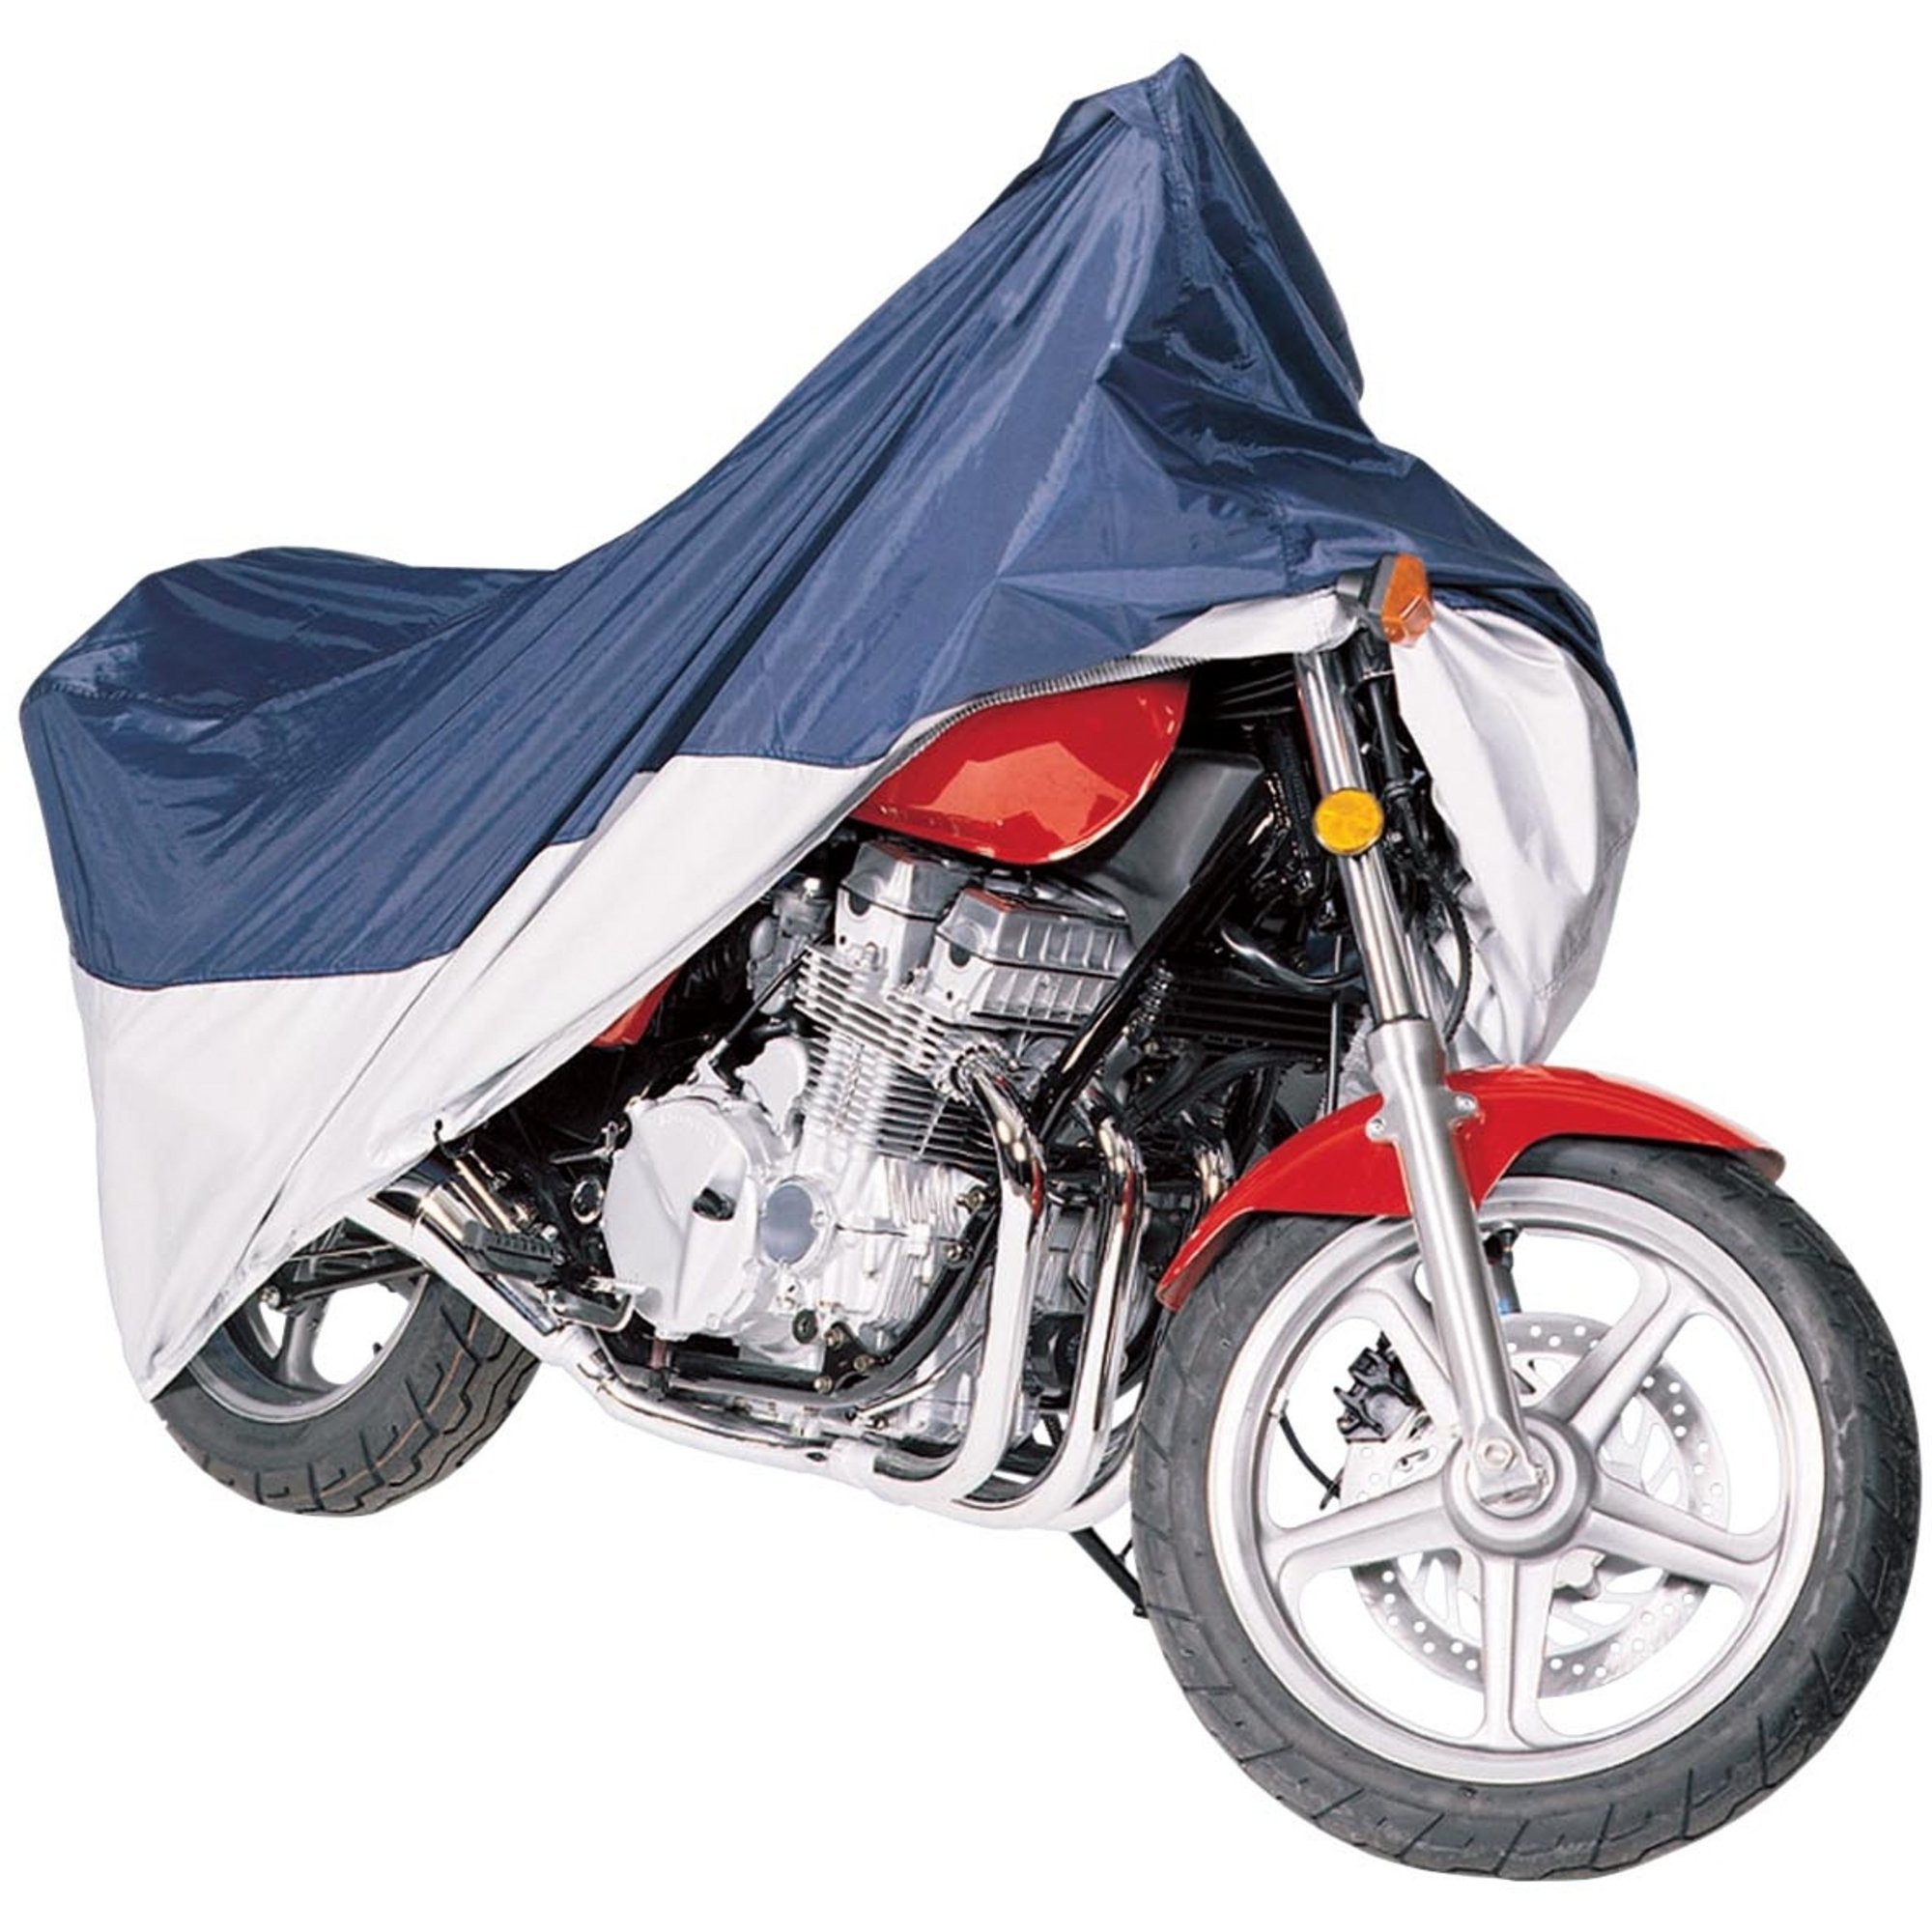 Classic Accessories MotoGear Motorcycle Cover - XL, Blue and Silver, Fits Motorcycles up to 1,500cc, Model 65-006-043501-00